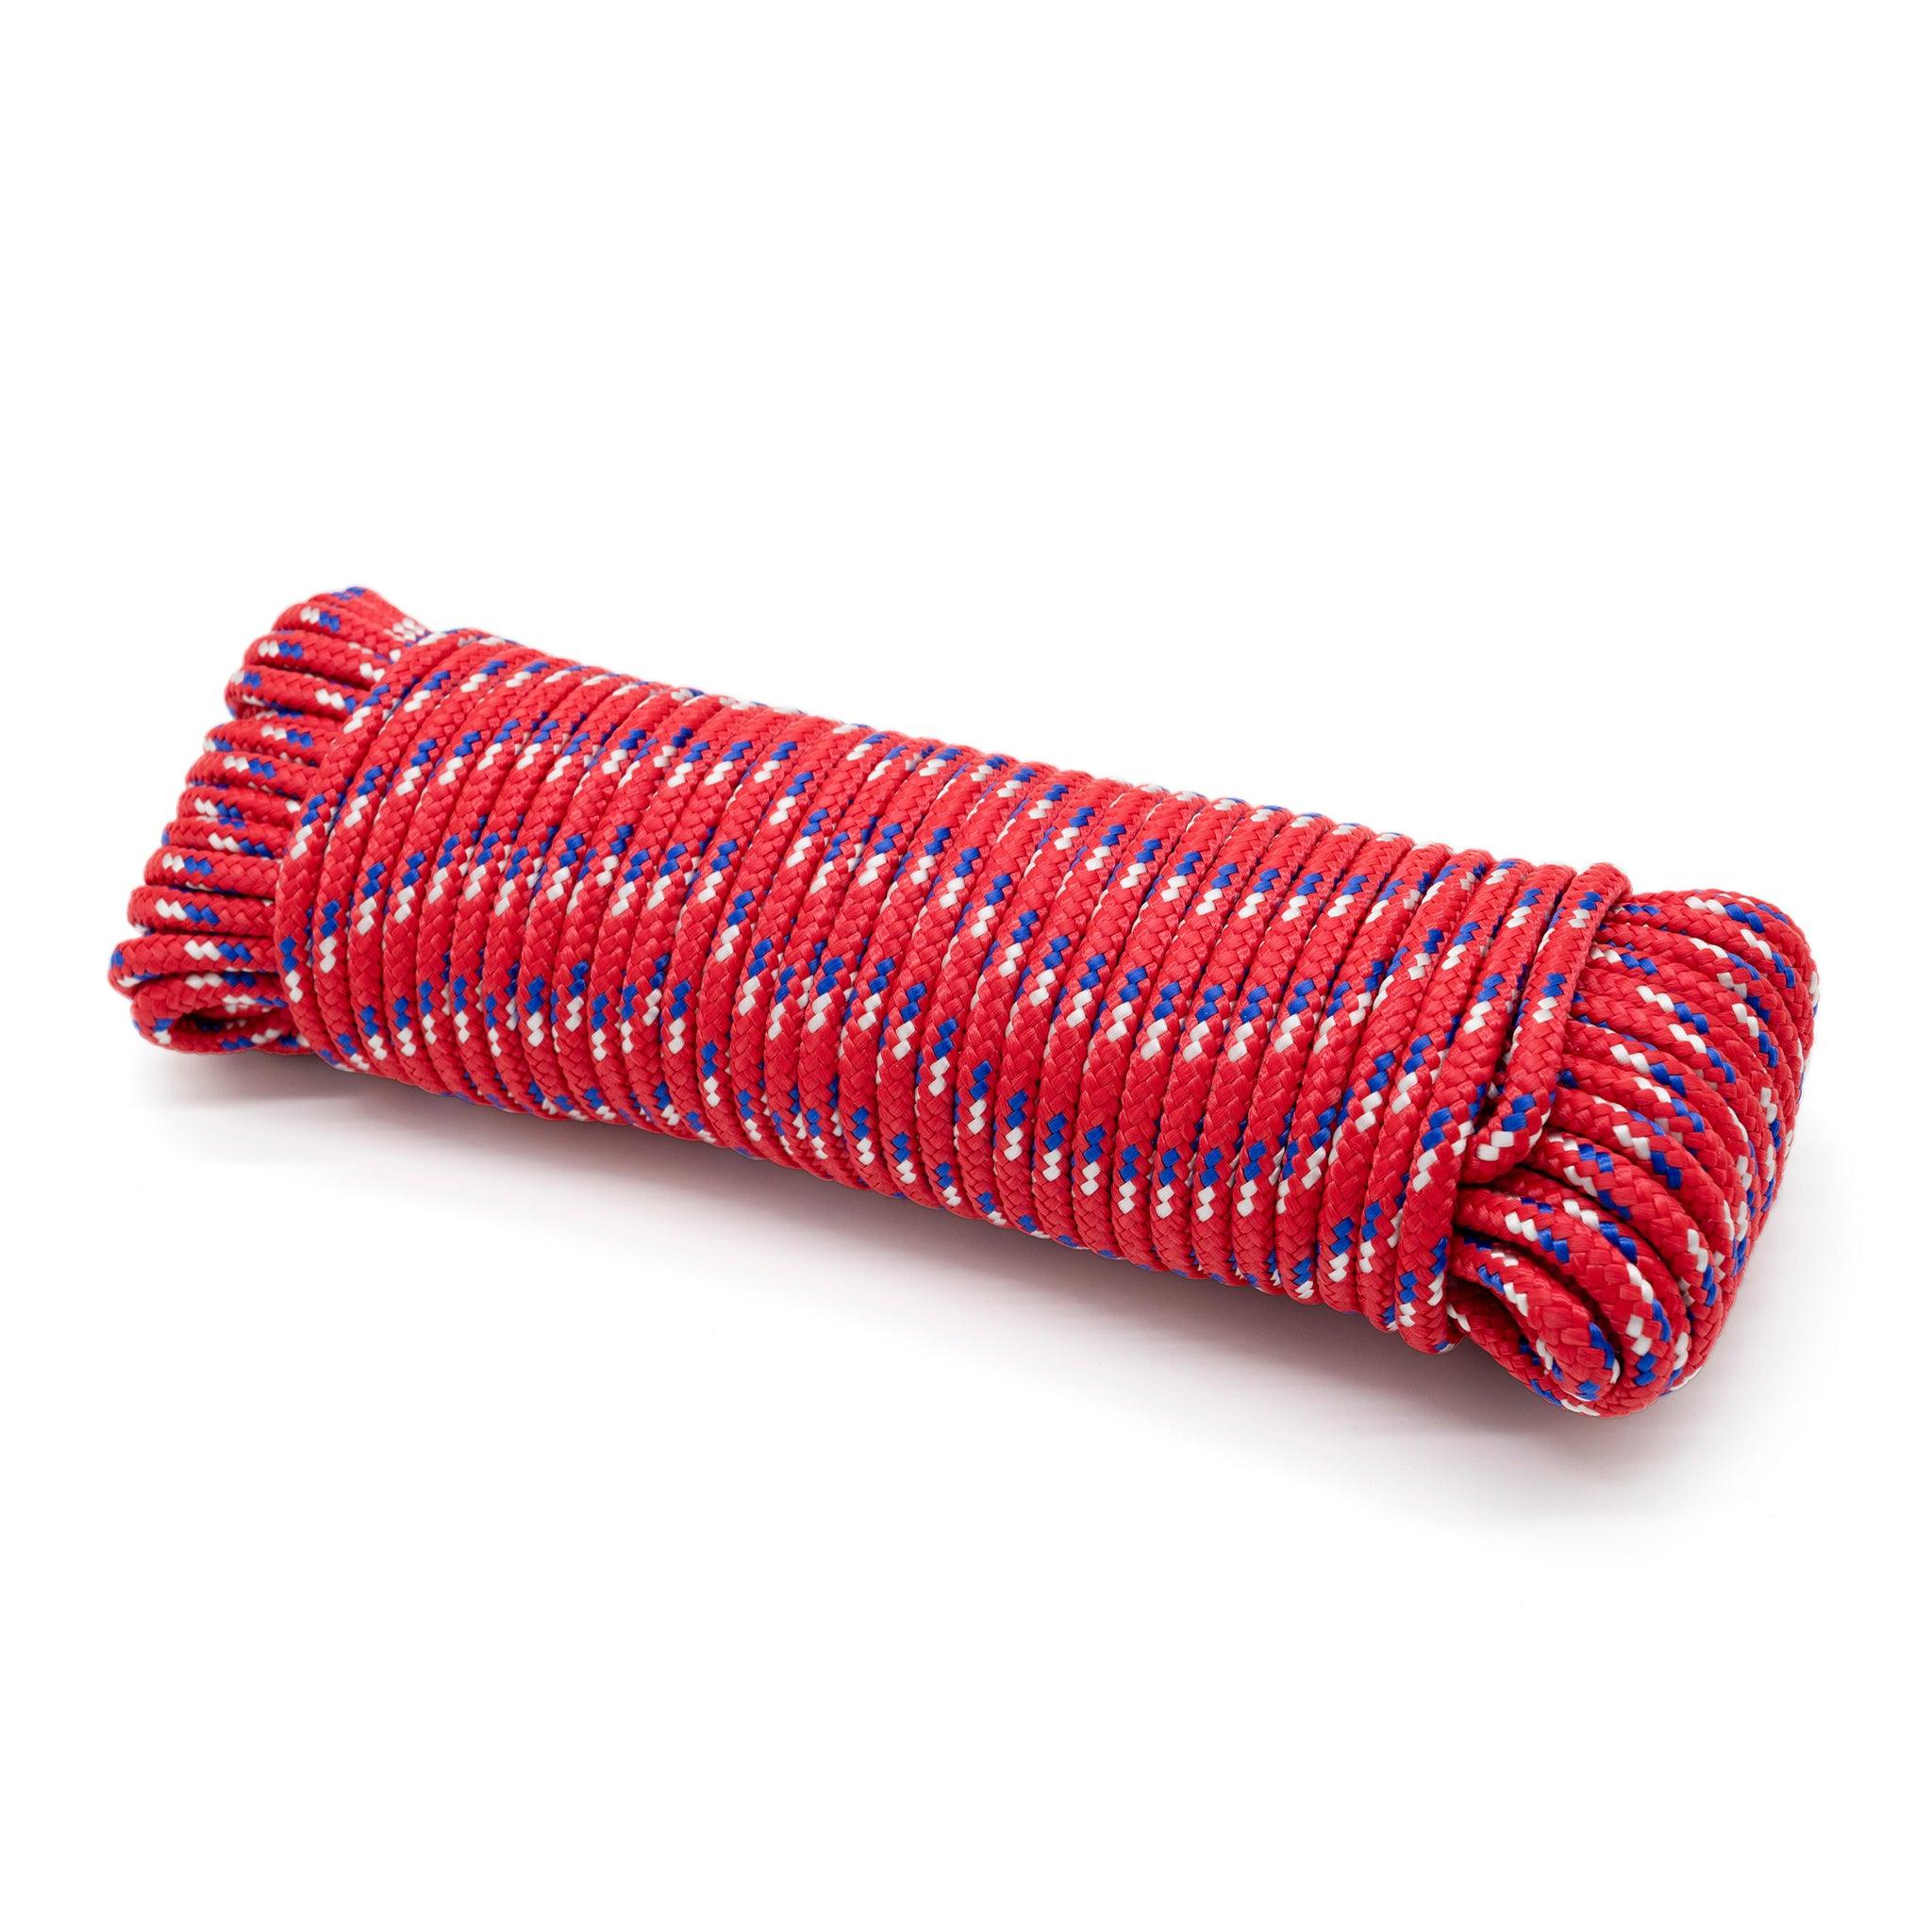 Utility Rope 6mm x 25m - Red